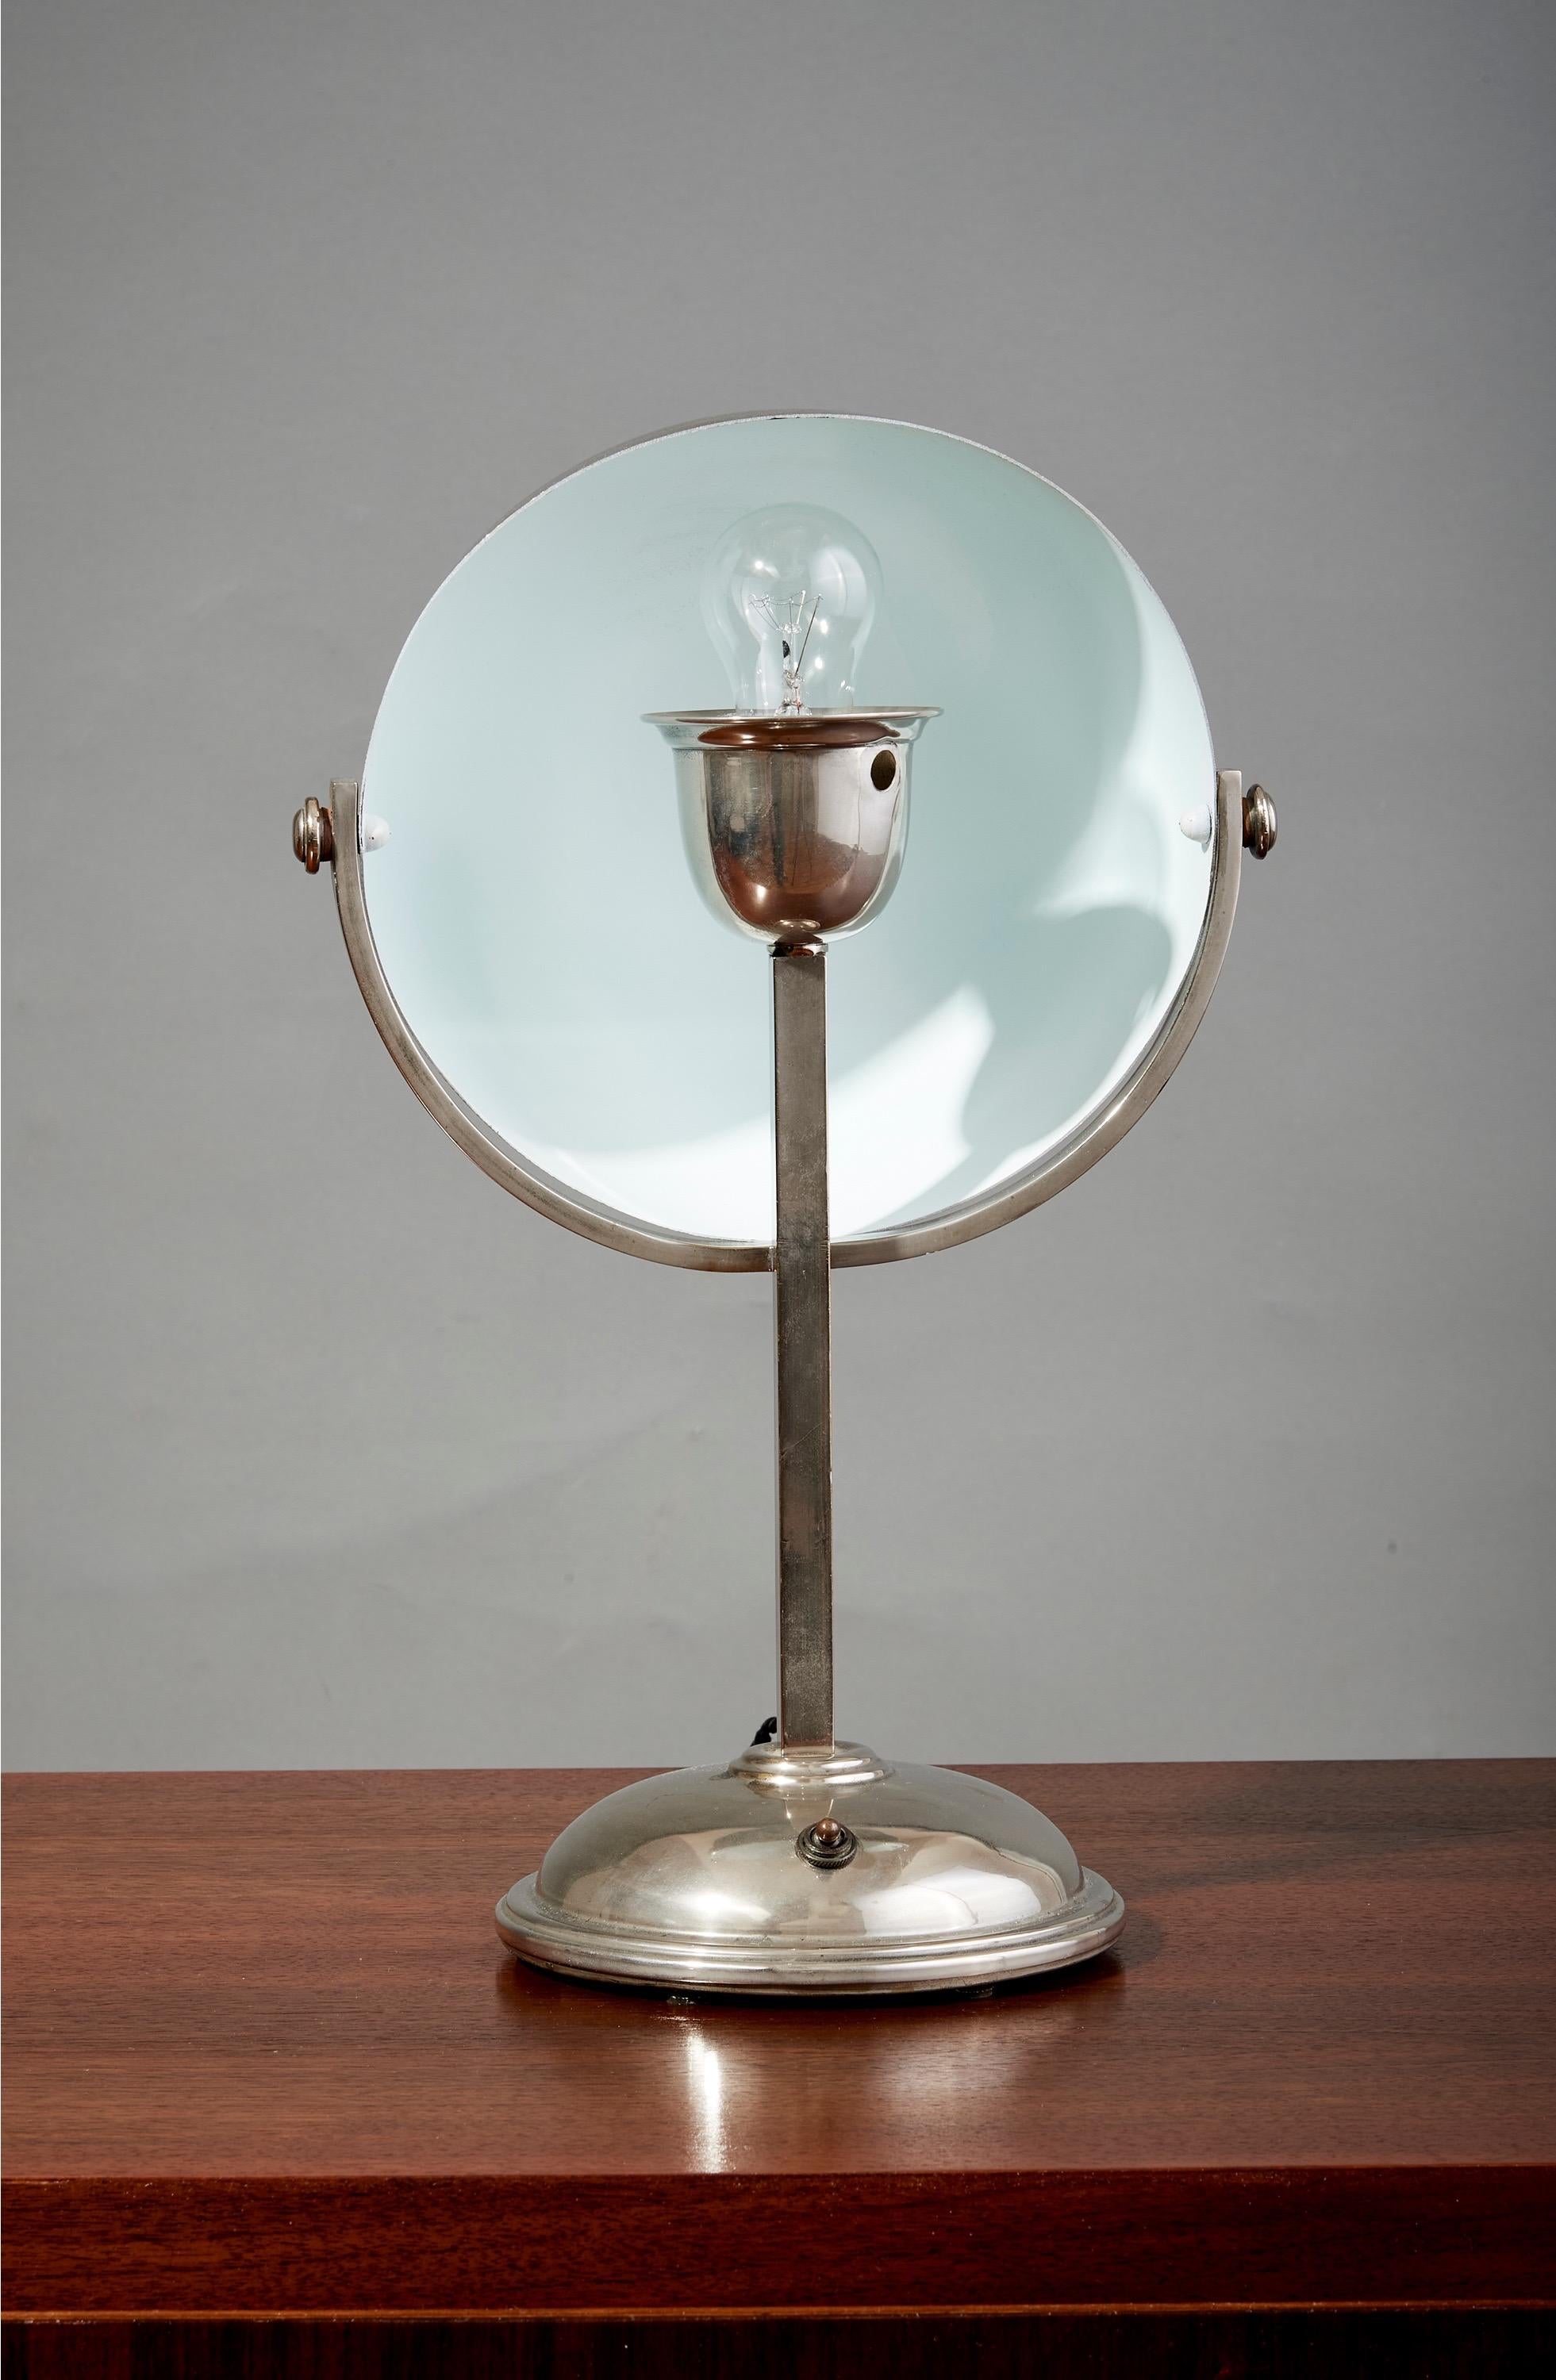 Felix Aublet Style Nickel-Plated Table Lamp with Rounded Shade, France 1930's For Sale 2